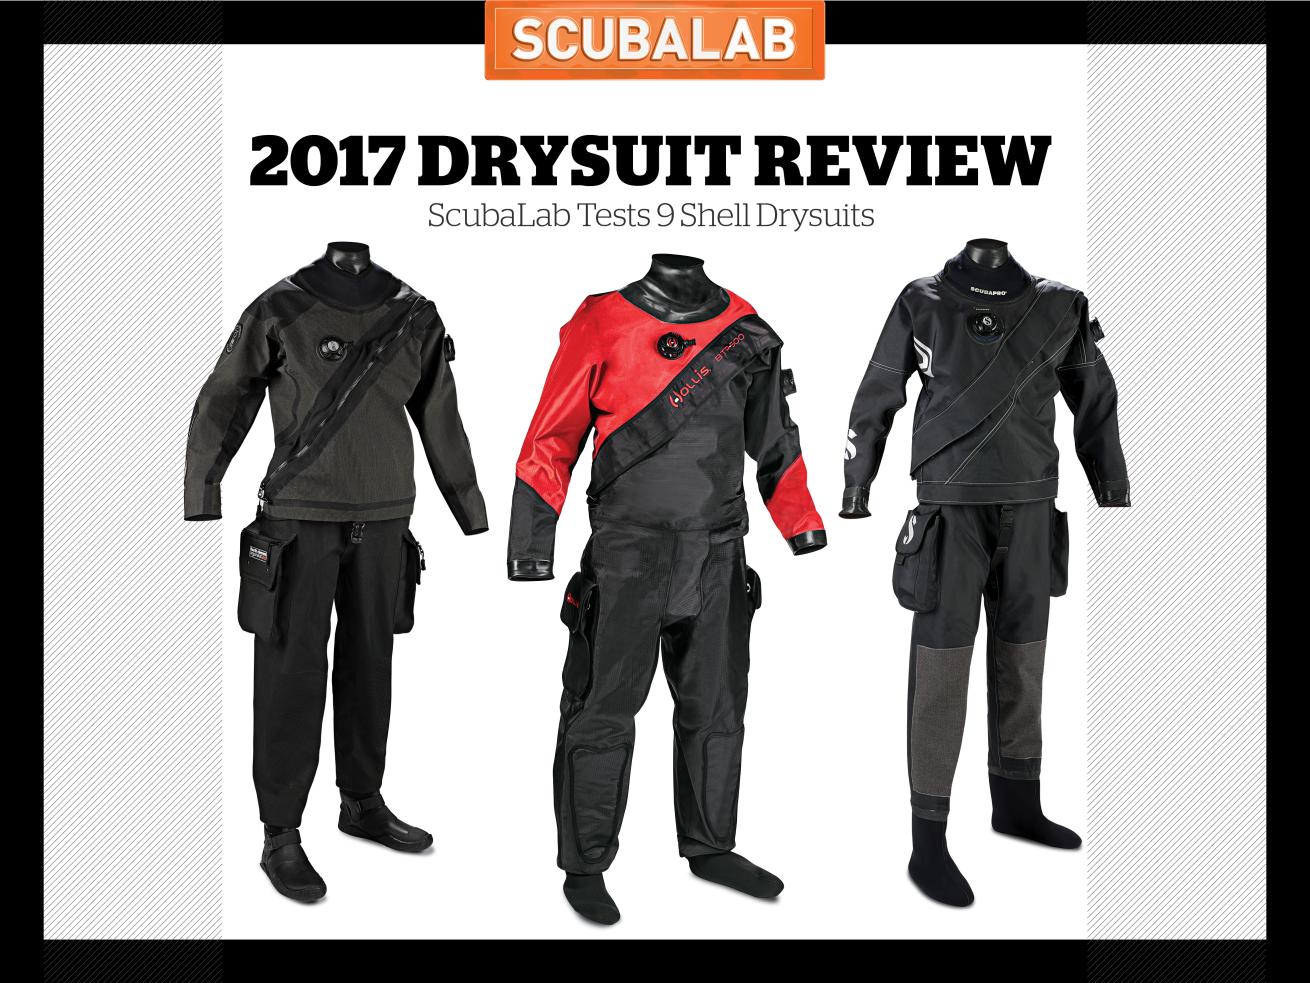 ScubaLab reviews the newest drysuits of 2017